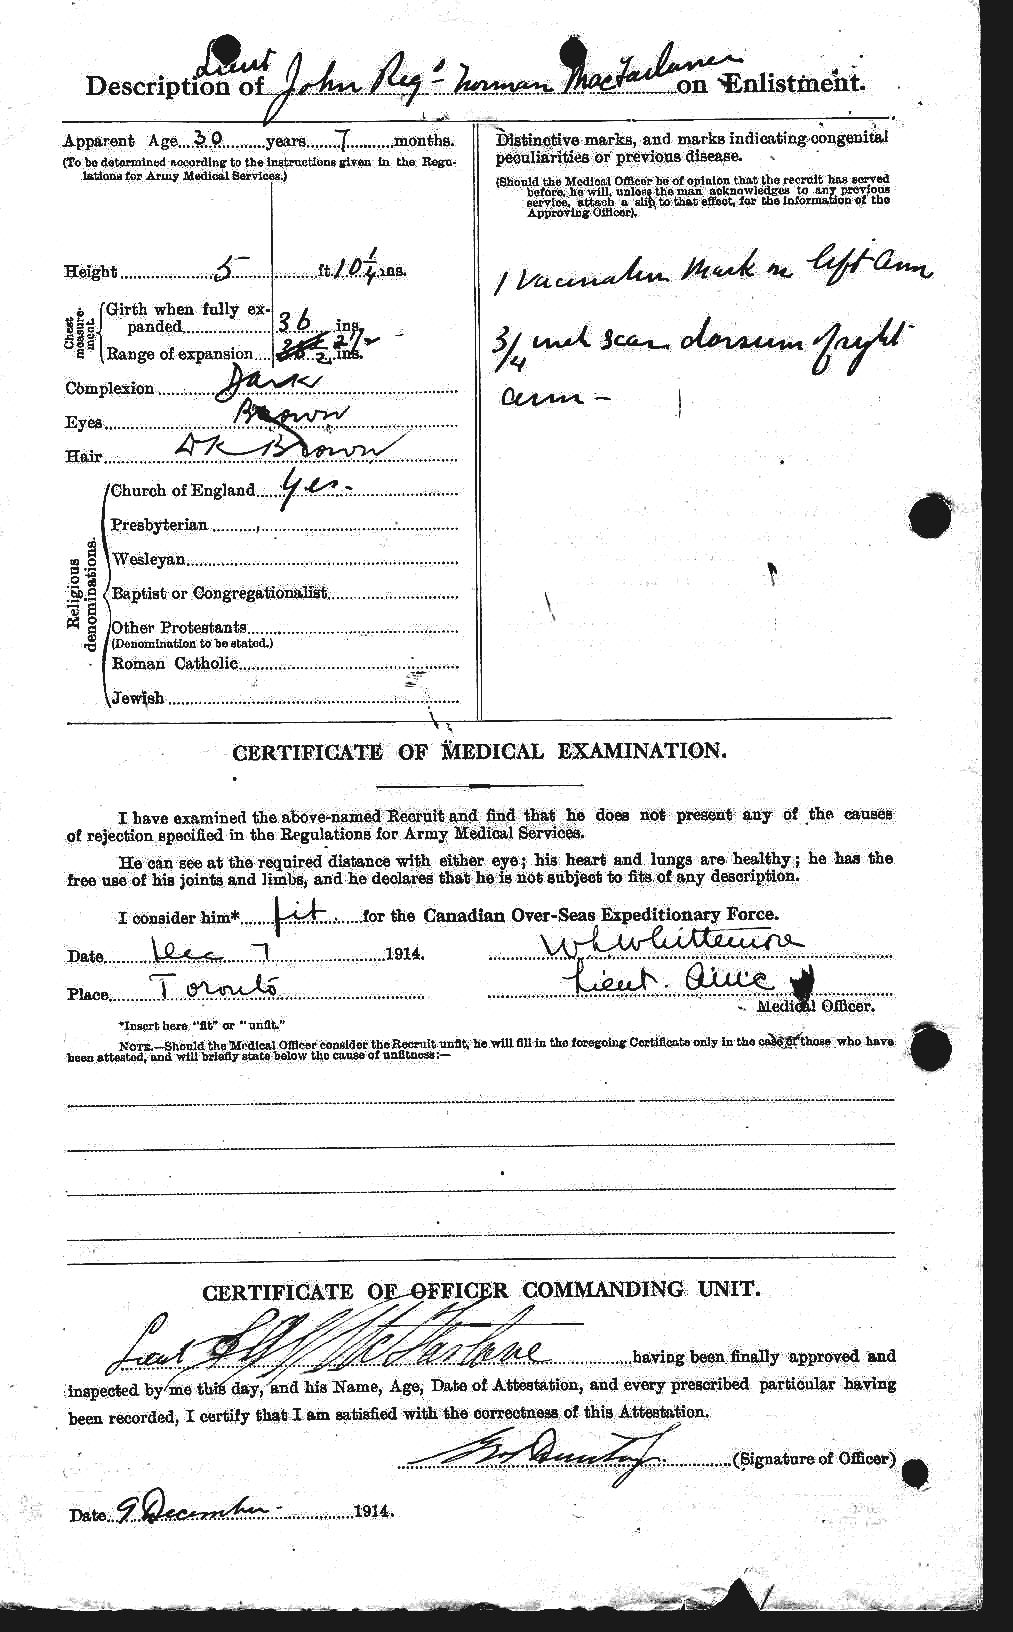 Personnel Records of the First World War - CEF 522701b